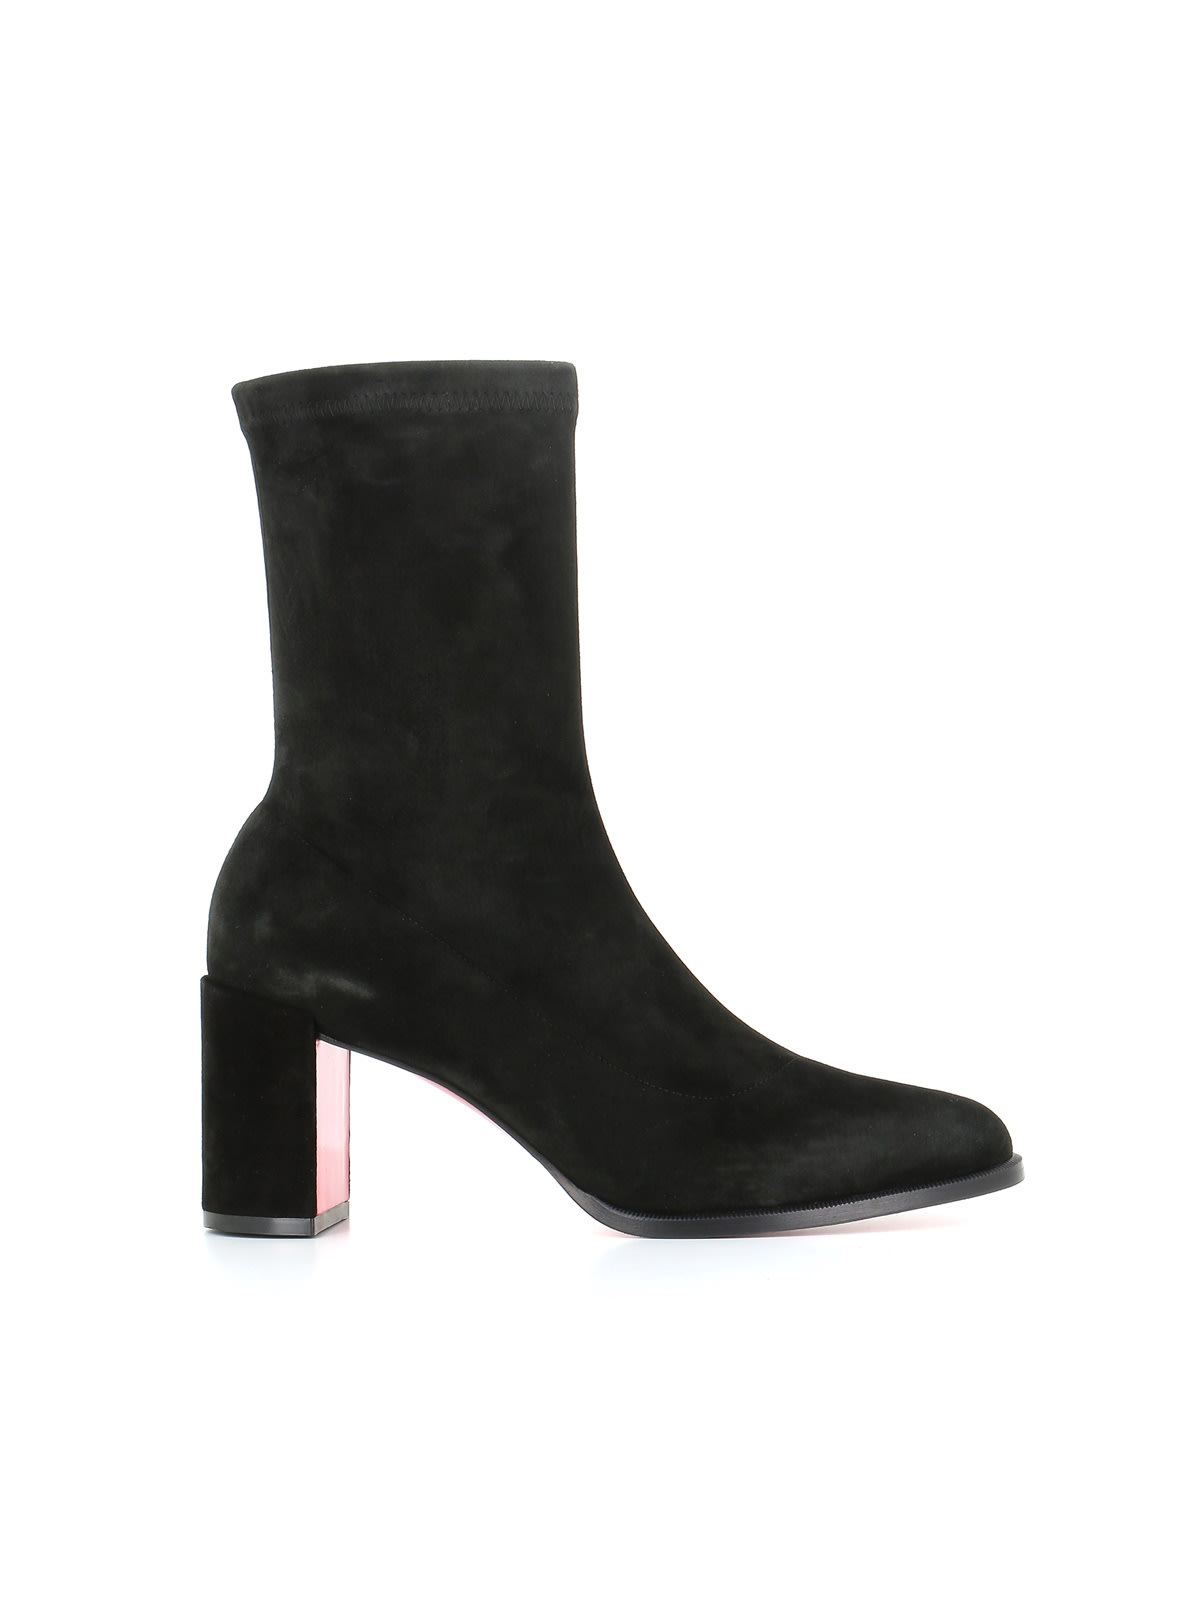 CHRISTIAN LOUBOUTIN ANKLE BOOT STRETCHADOXA 70